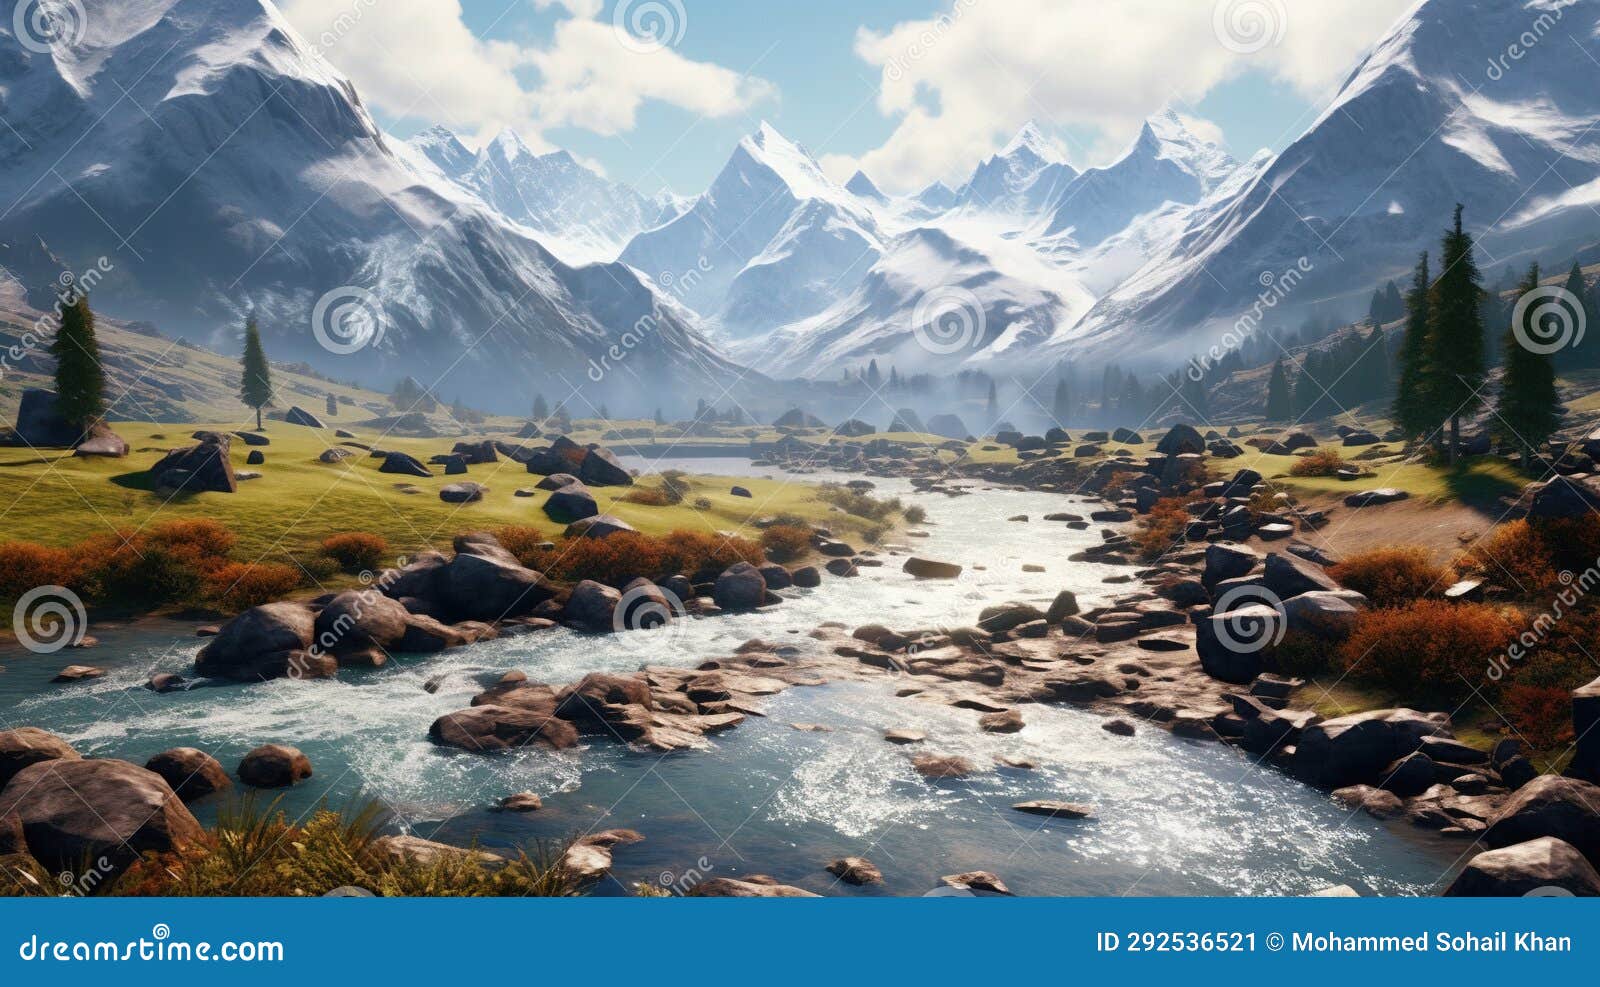 Floating River Water Surrounded by Big Snow Moutains Background Stock ...